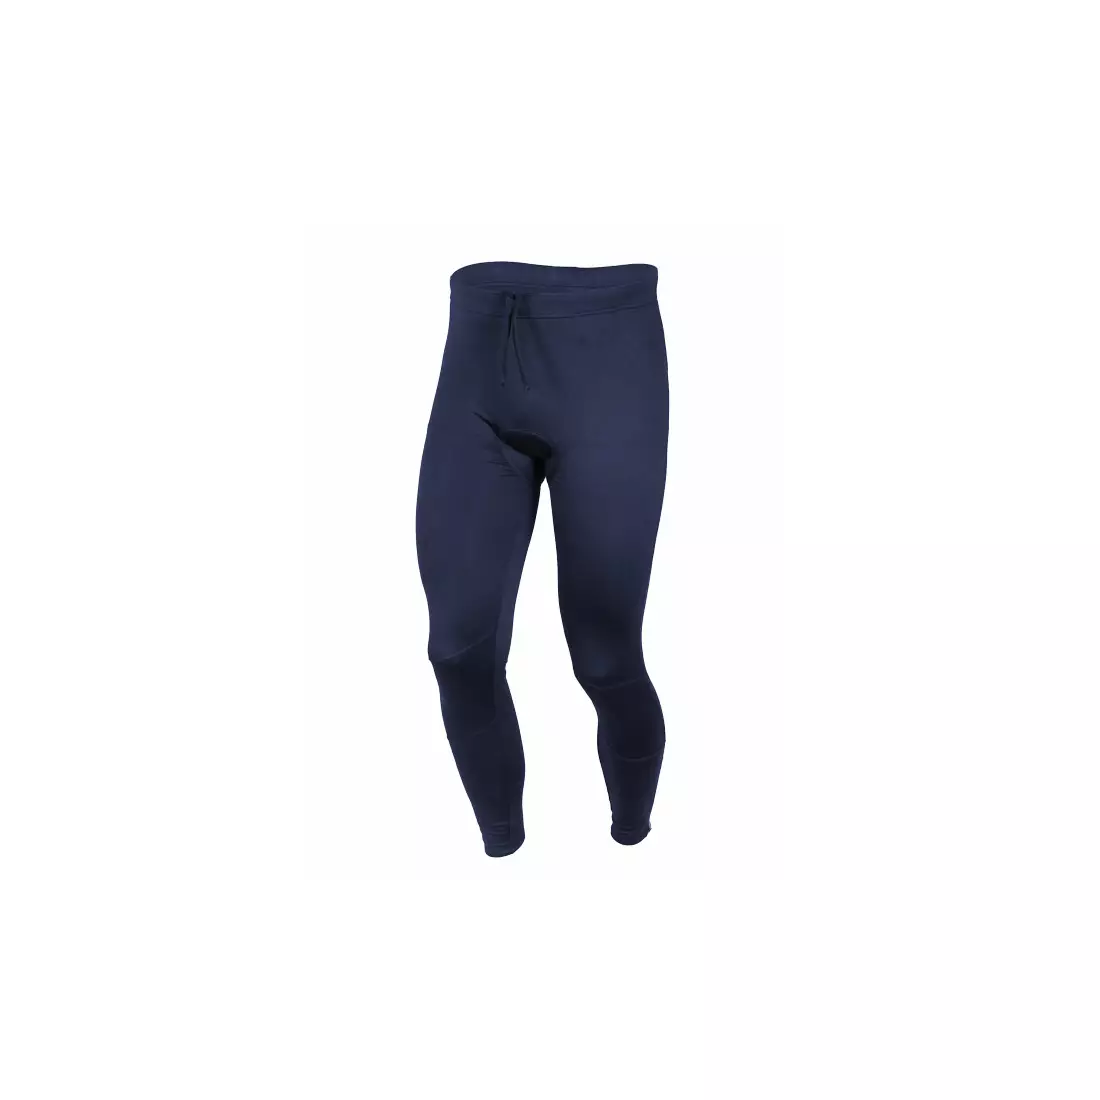 CRIVIT - insulated cycling pants with insert - navy blue